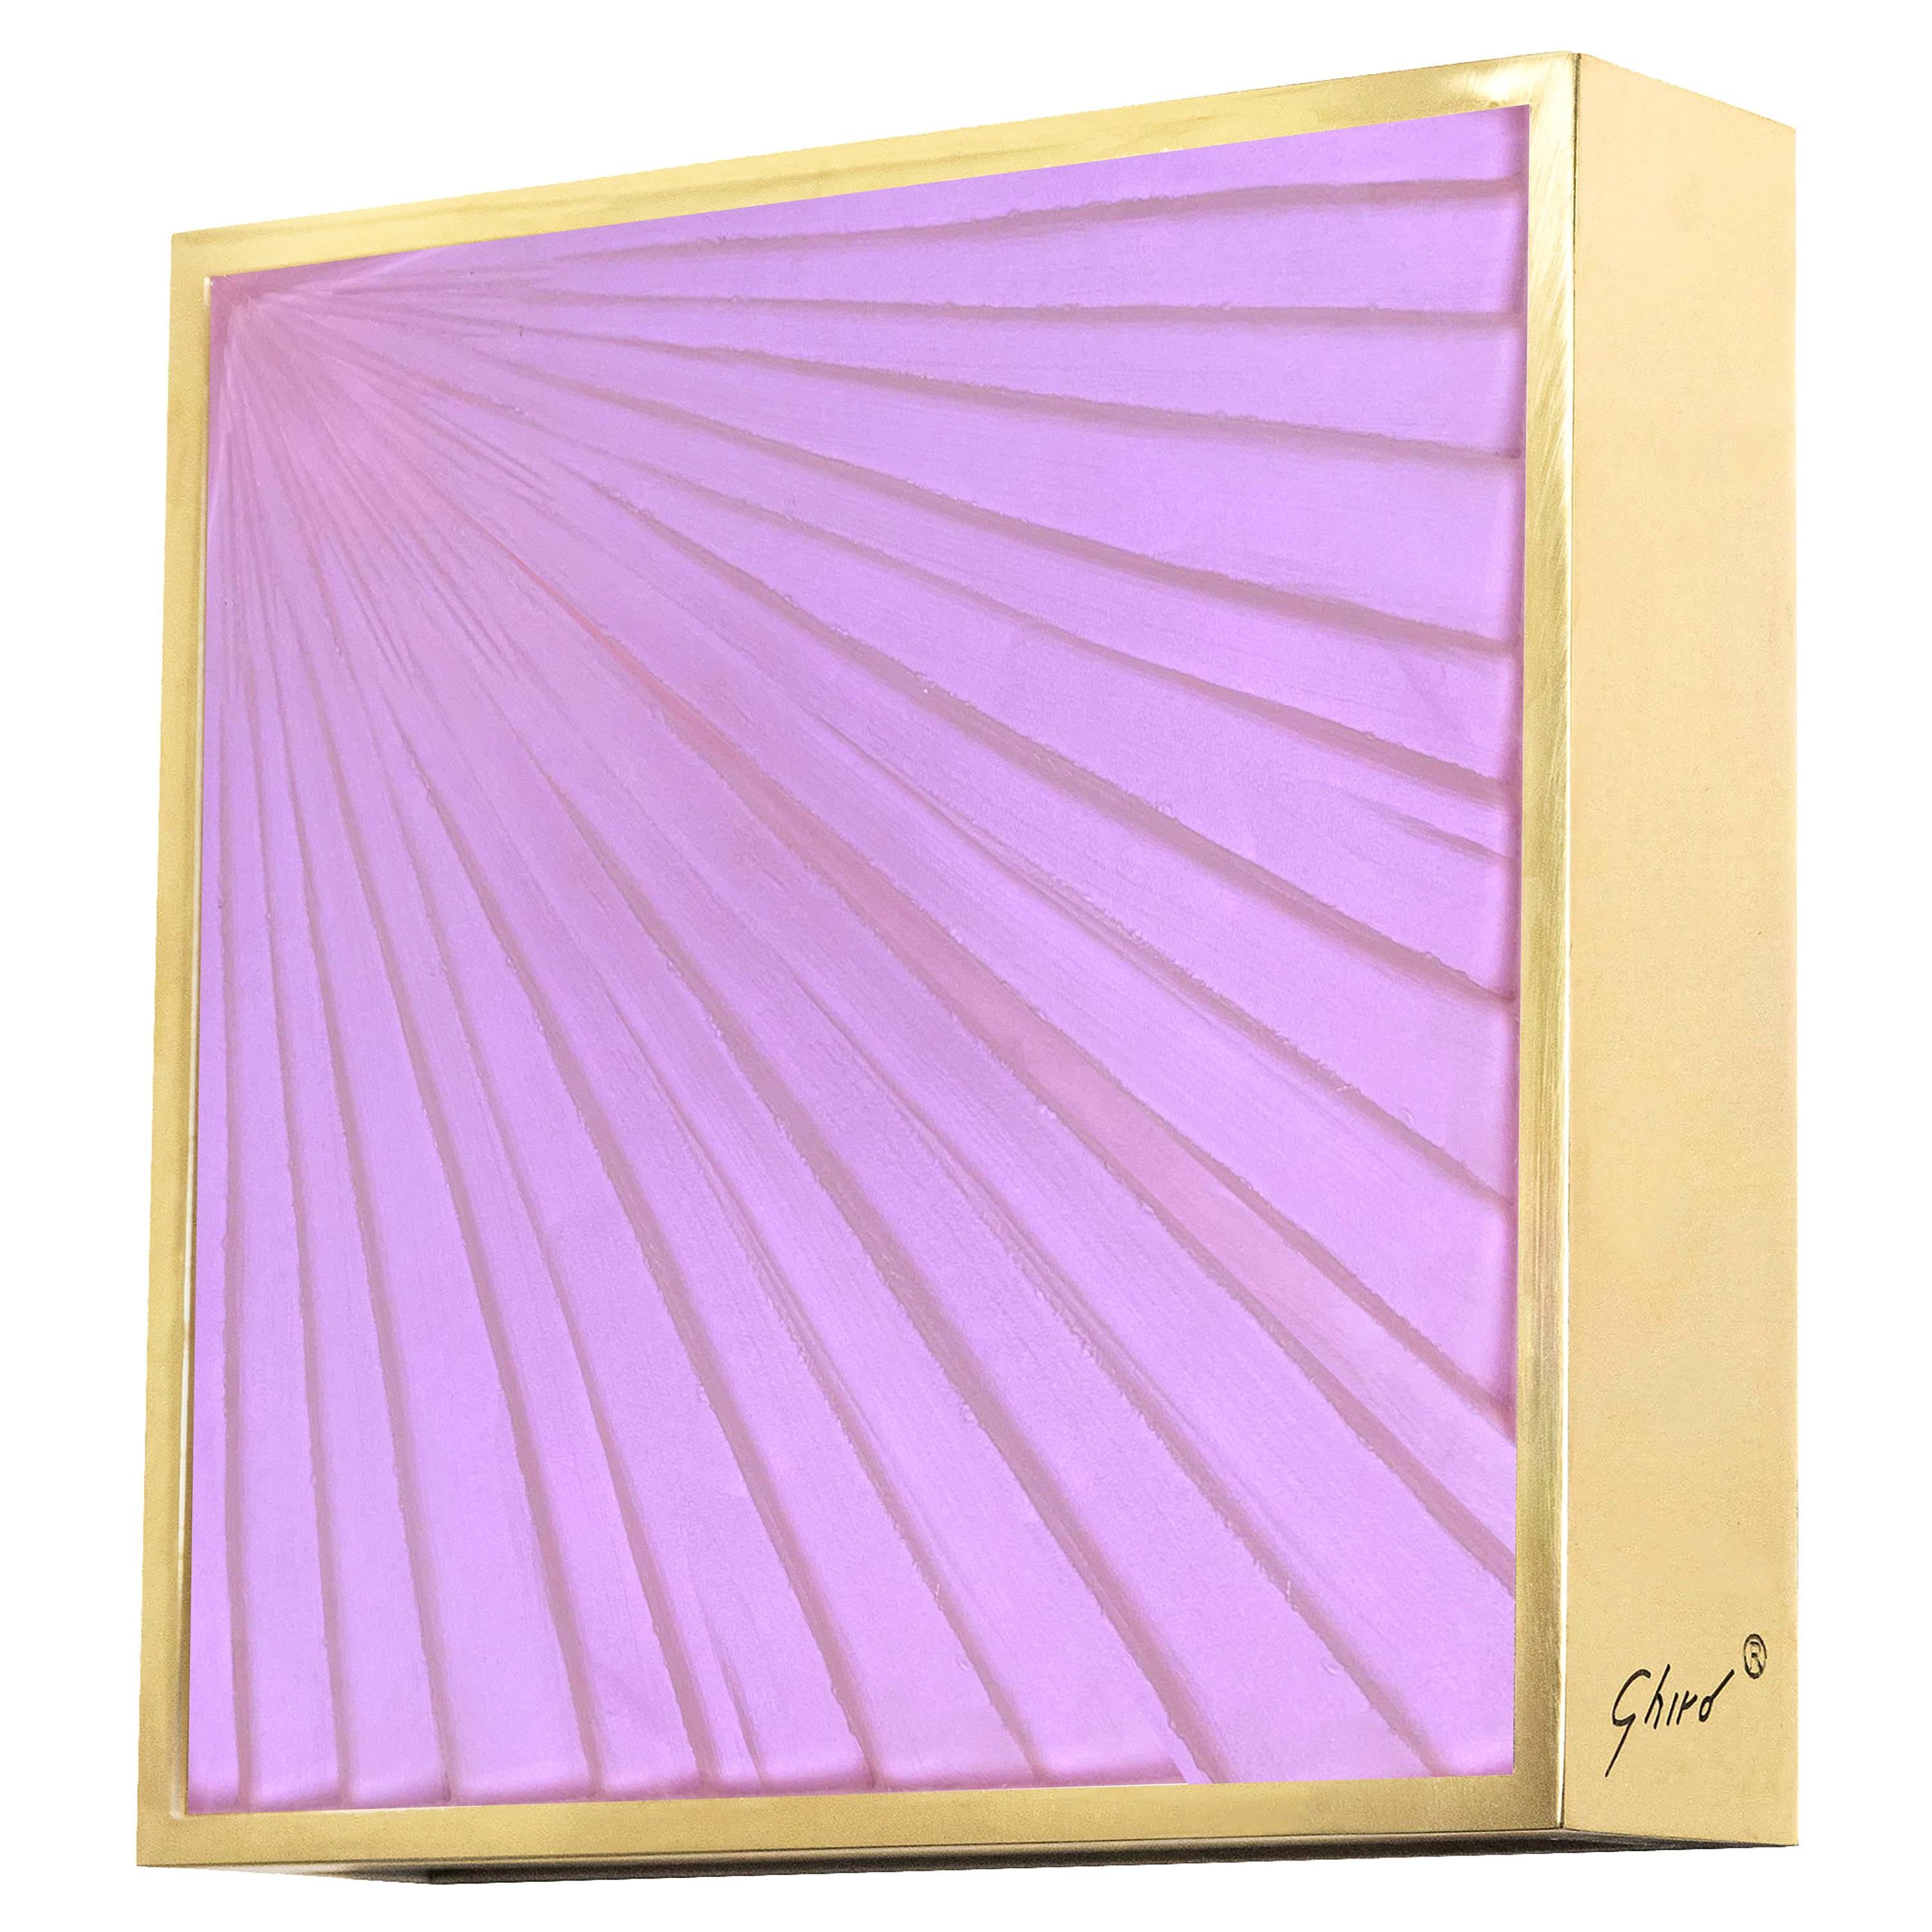 Contemporary 'Square' Sconce Pink Crystal, Brass and 24 Kt Gold by Ghirò Studio